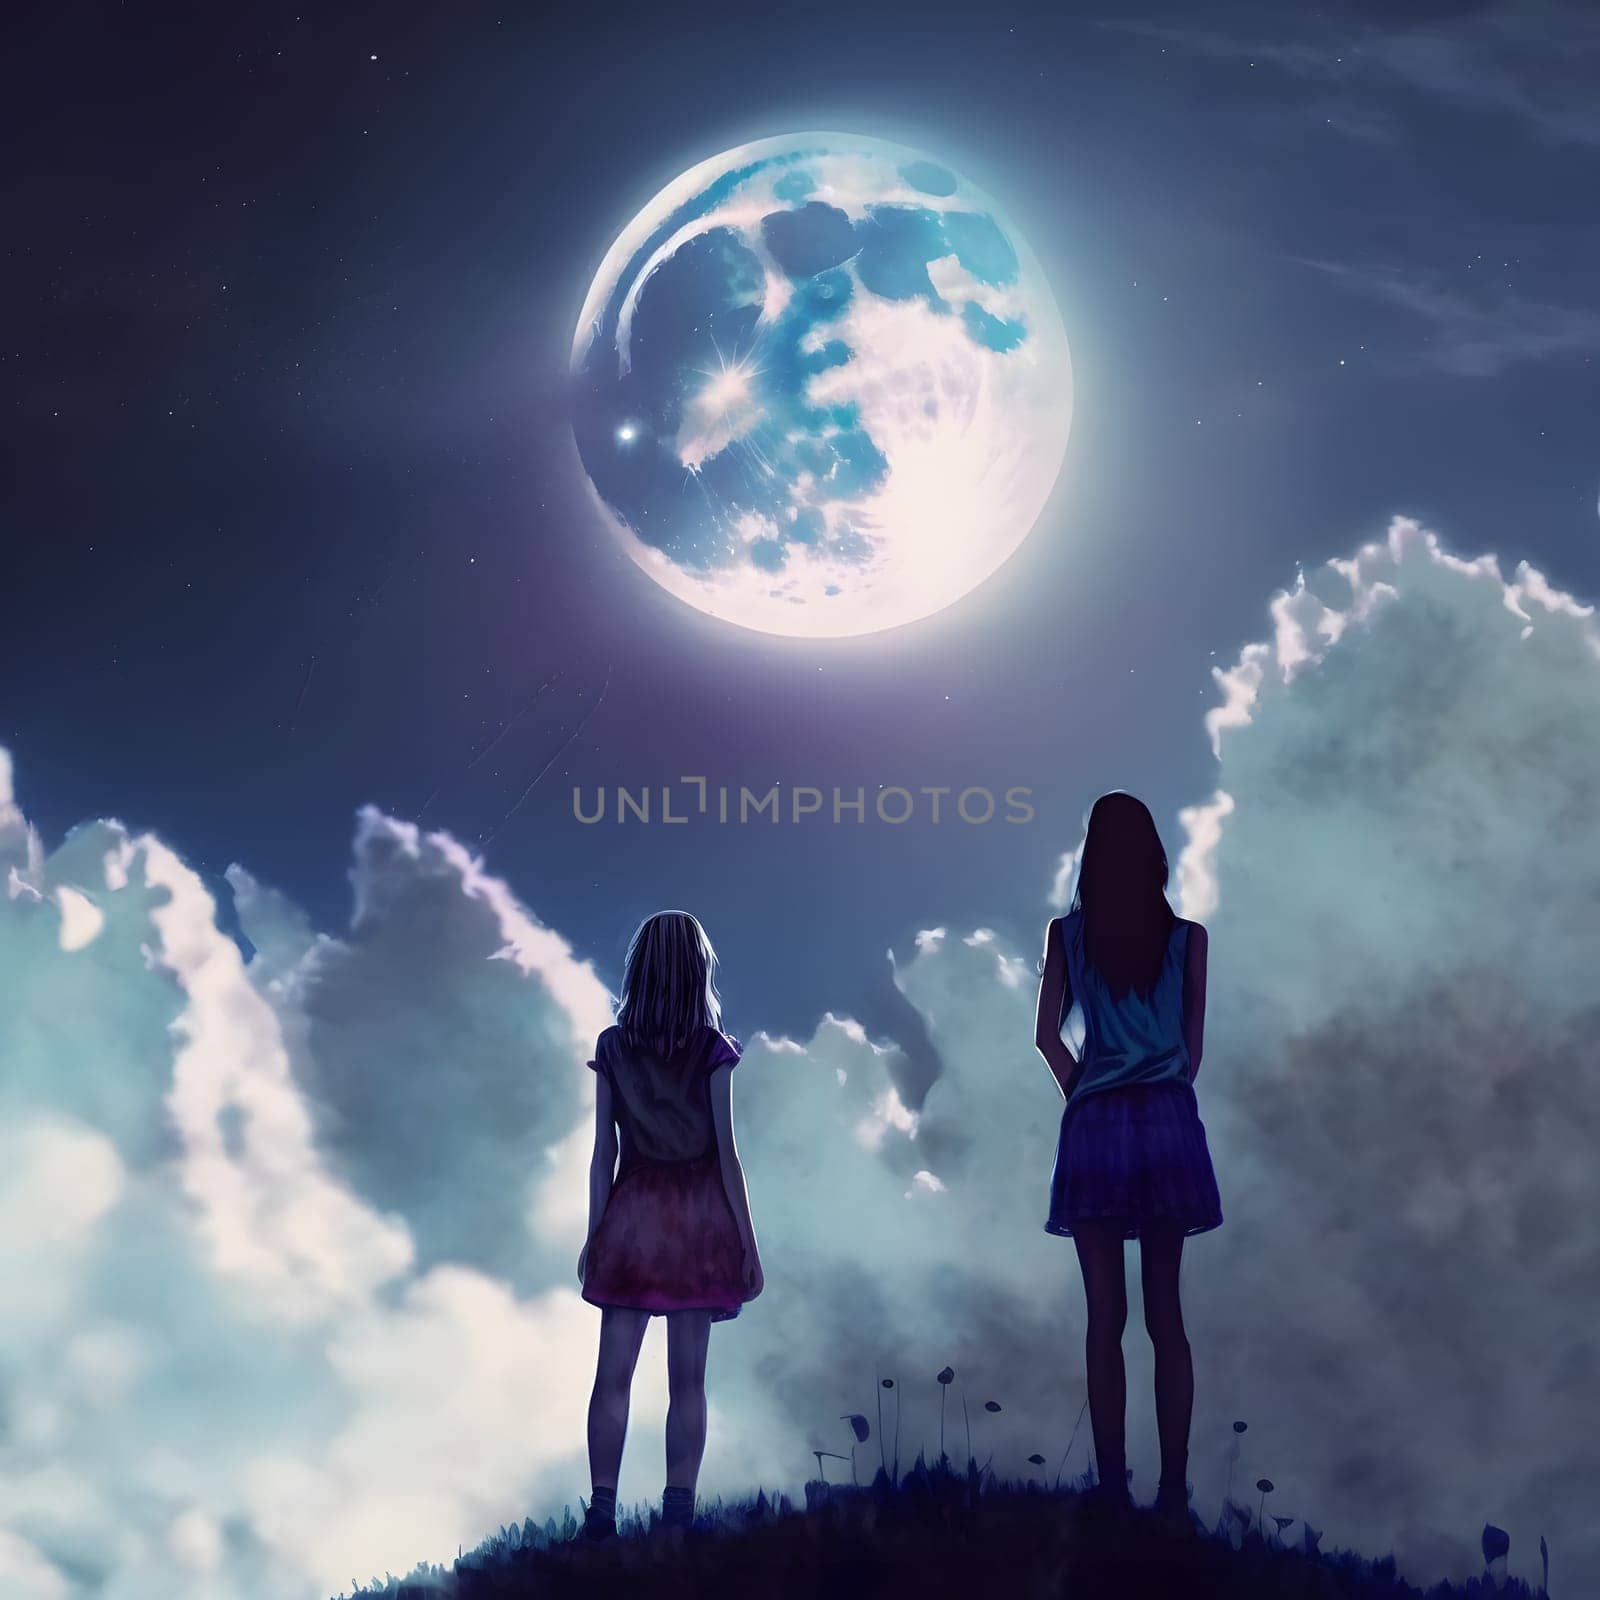 two girls looking up at the Moon in night sky, neural network generated art by z1b